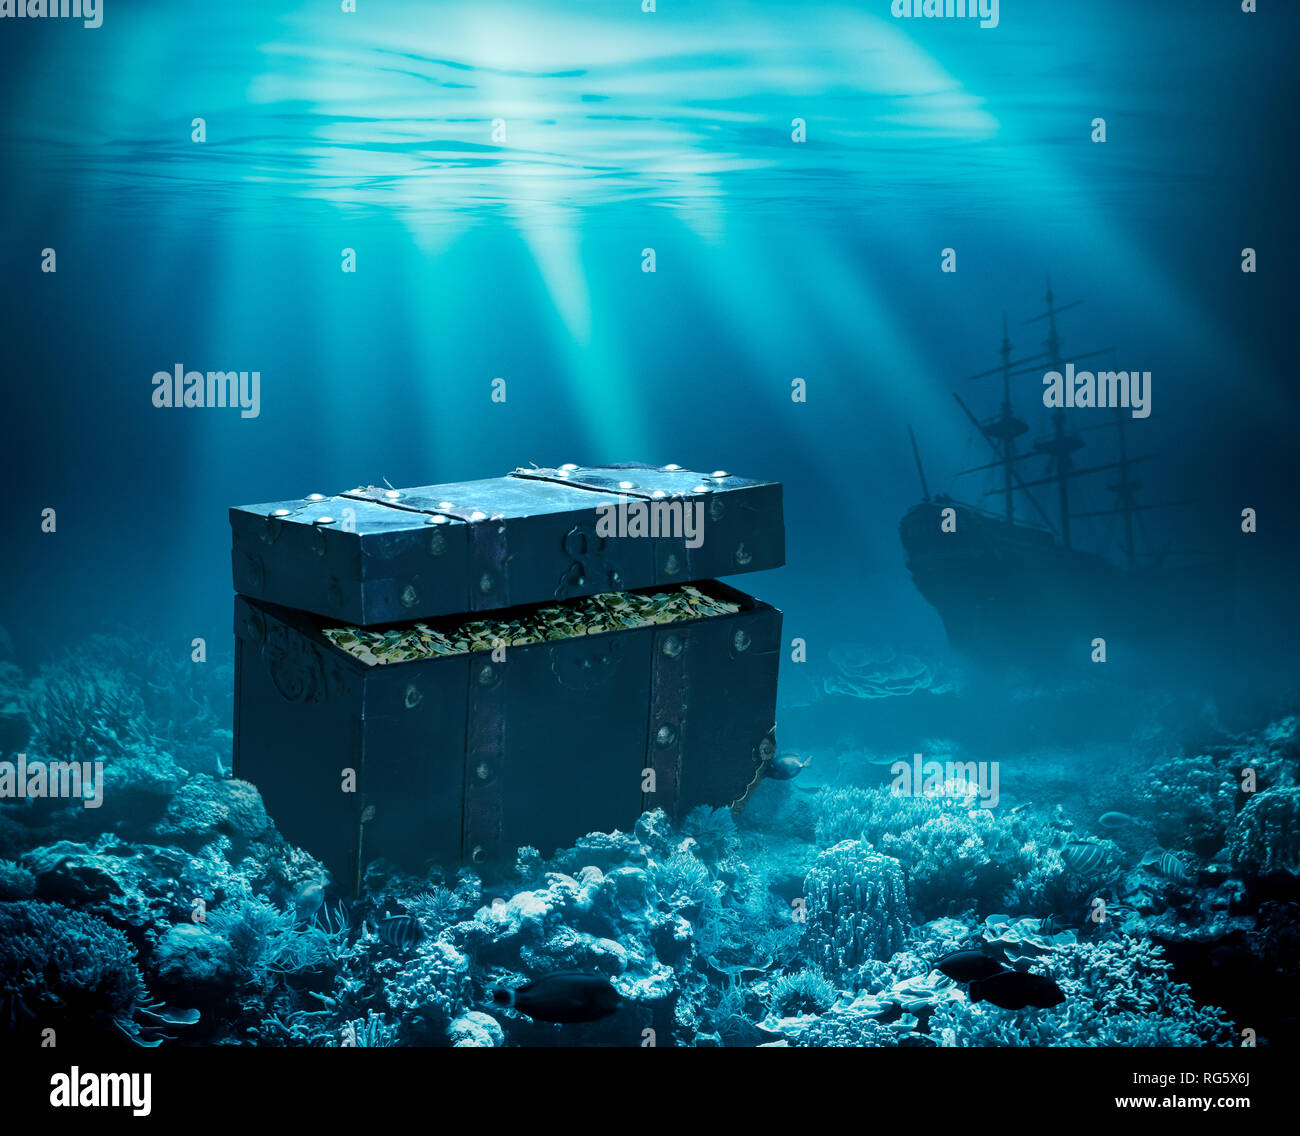 Treasures on the seabed. Sunken chest with gold and ship under water 3d illustration Stock Photo